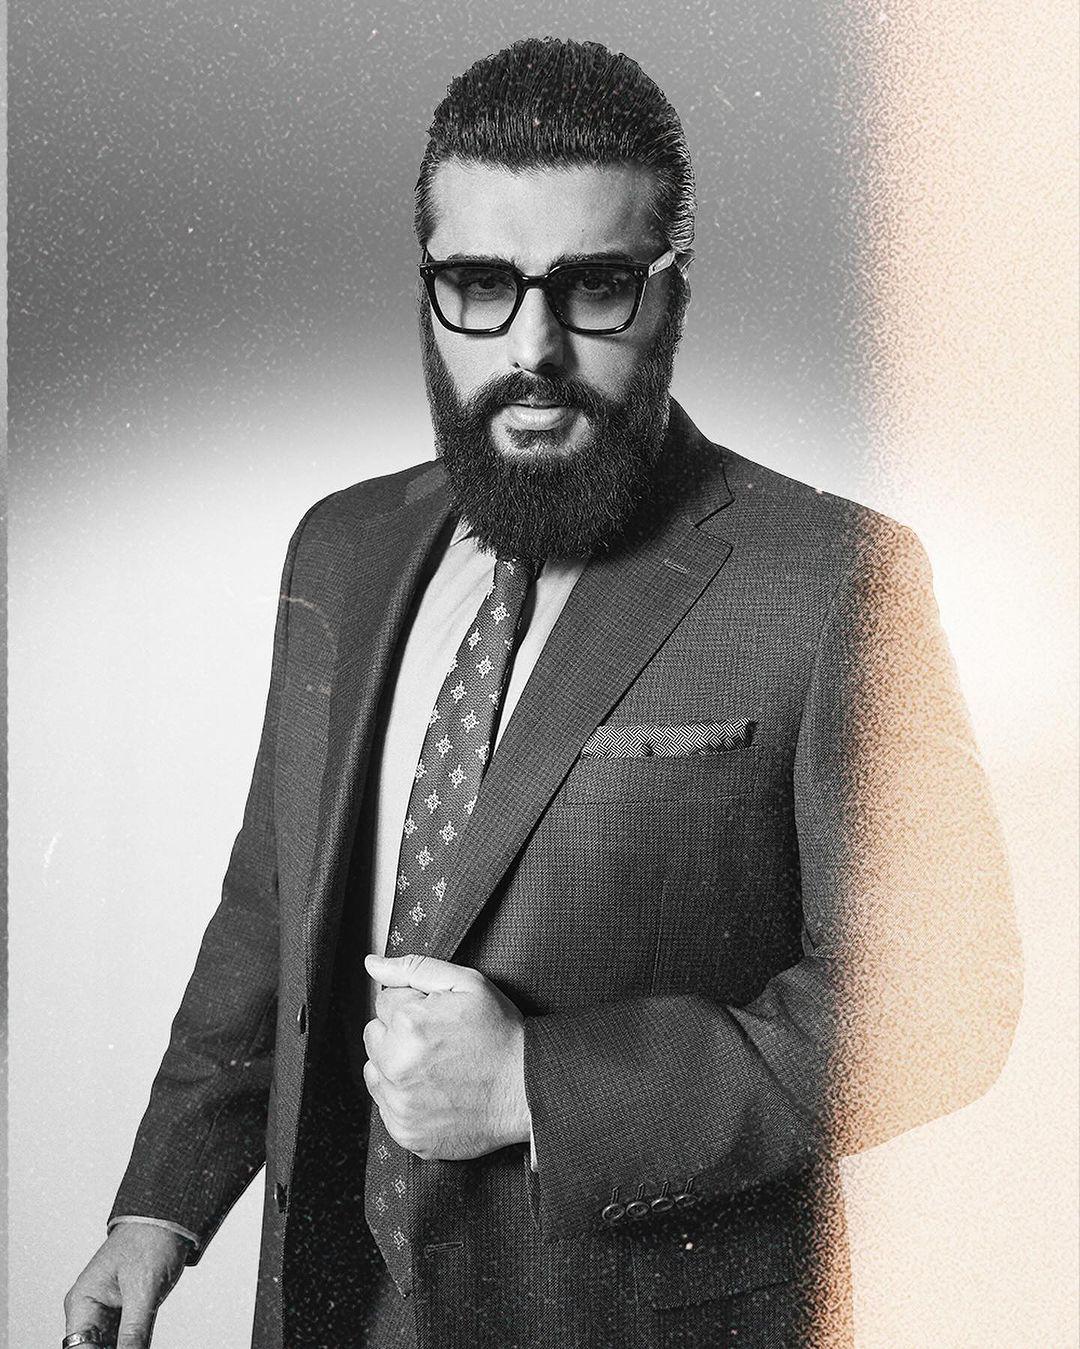 Always one to keep it classy, Arjun Kapoor gracefully sports a suit with a simple tie.